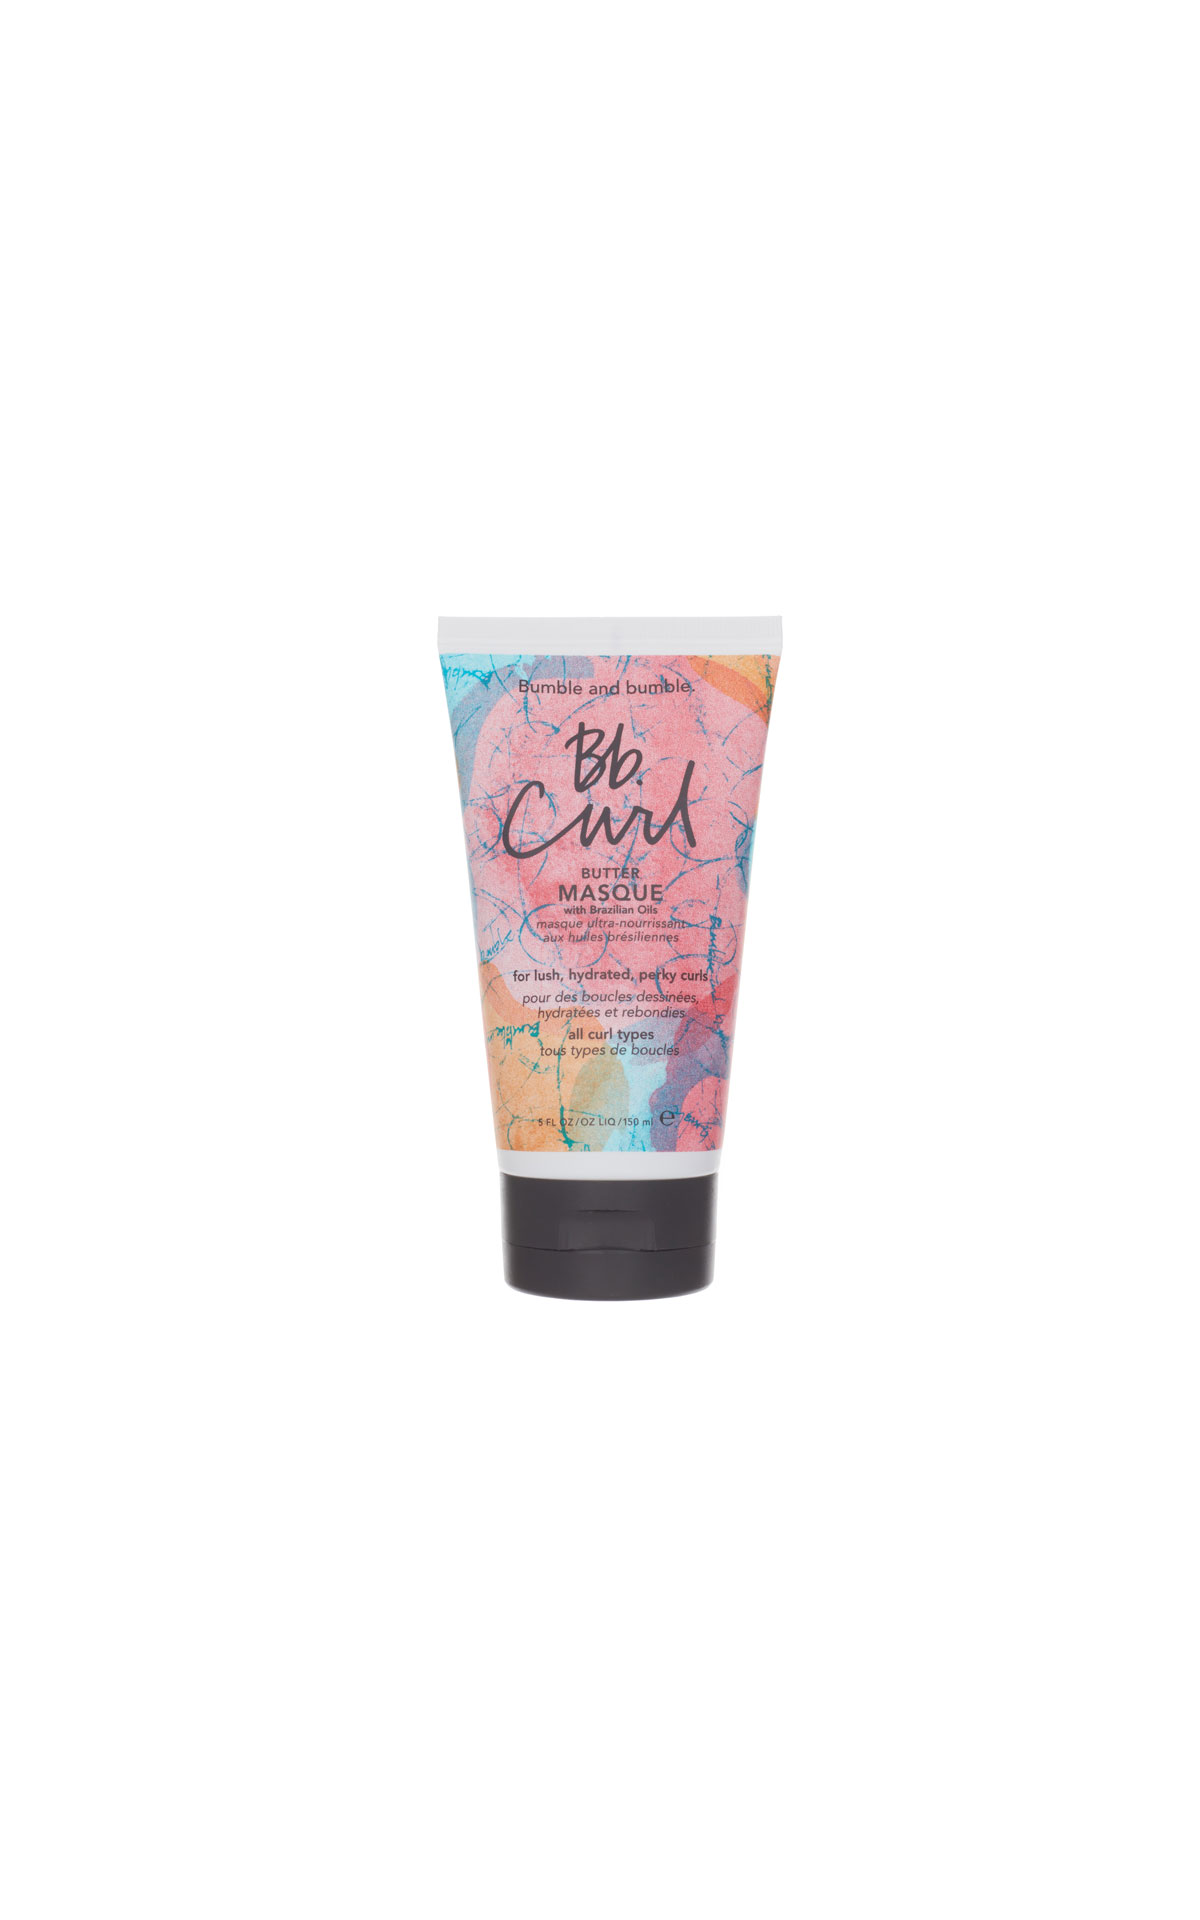 The Cosmetics Company Store Bumble & Bumble BB Curl Masque from Bicester Village